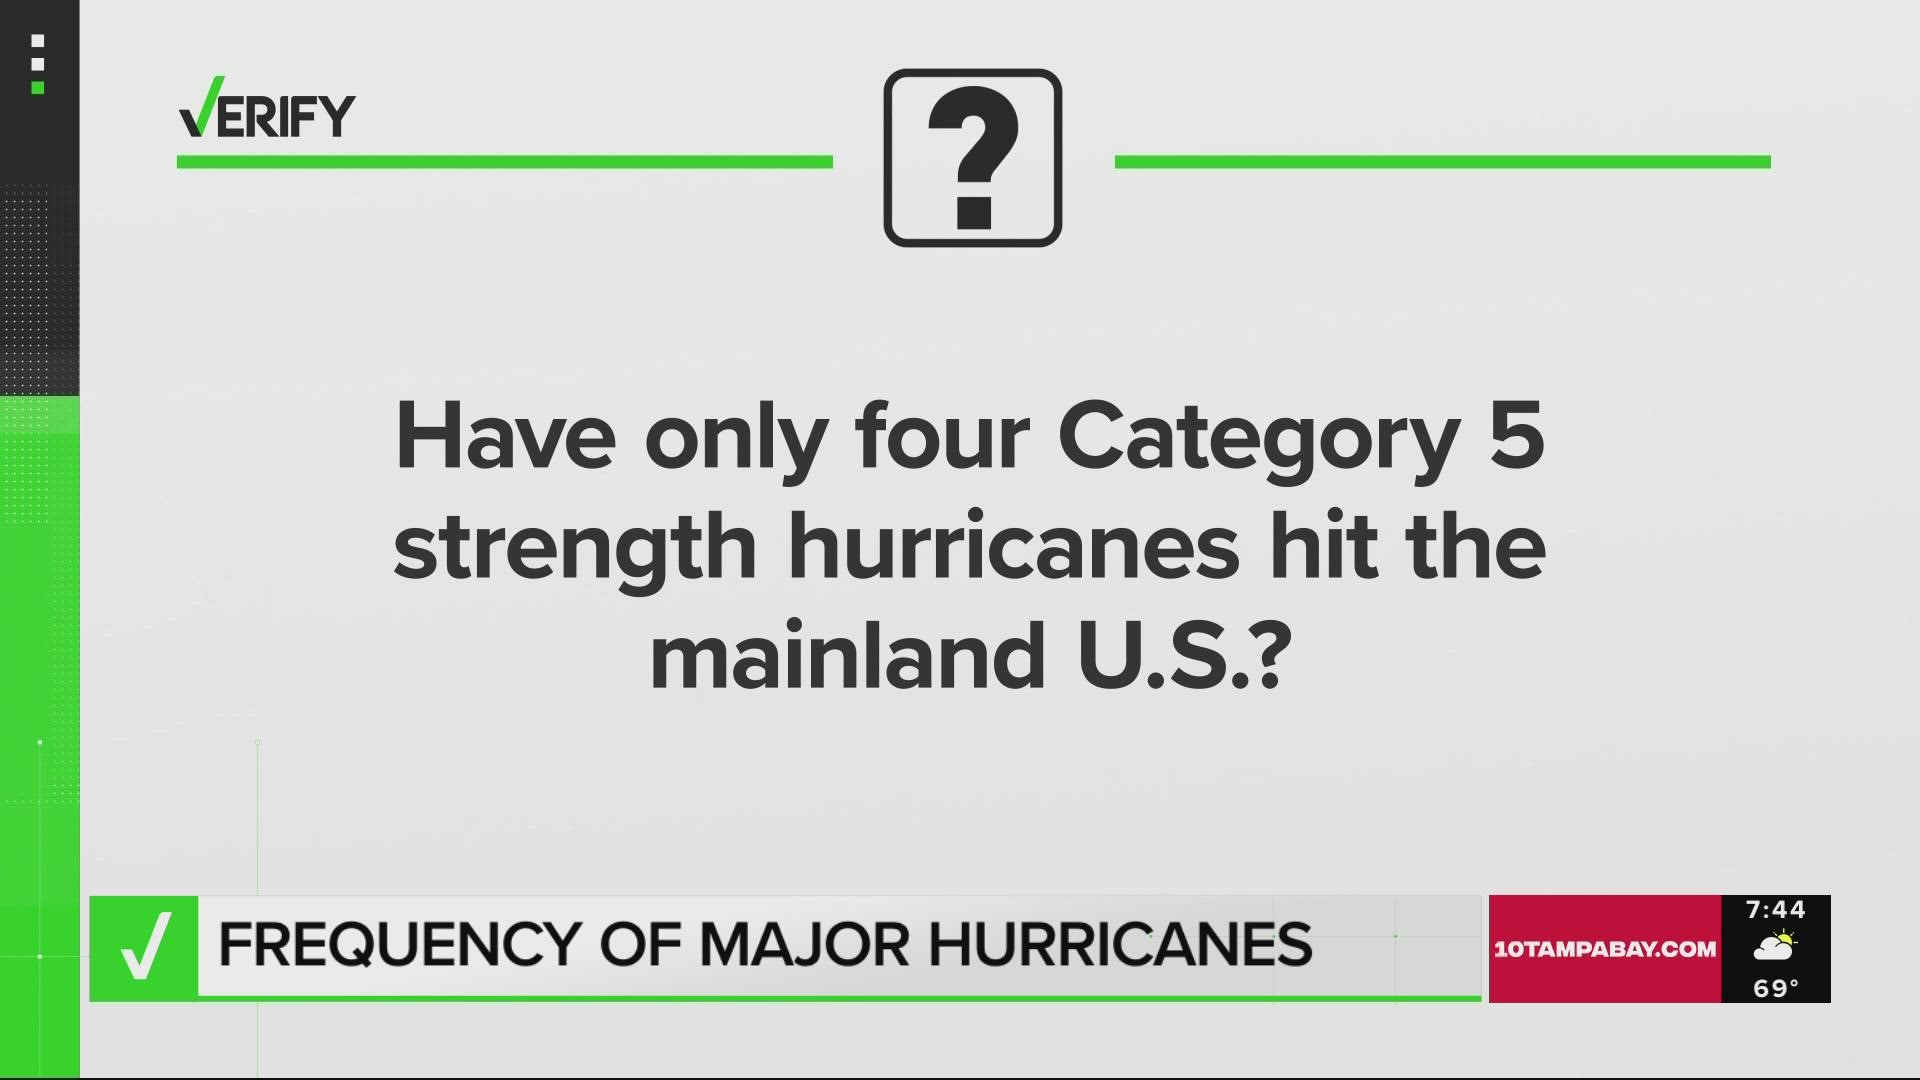 We are verifying your questions. Today we are answering: How many major hurricanes have hit the U.S.?